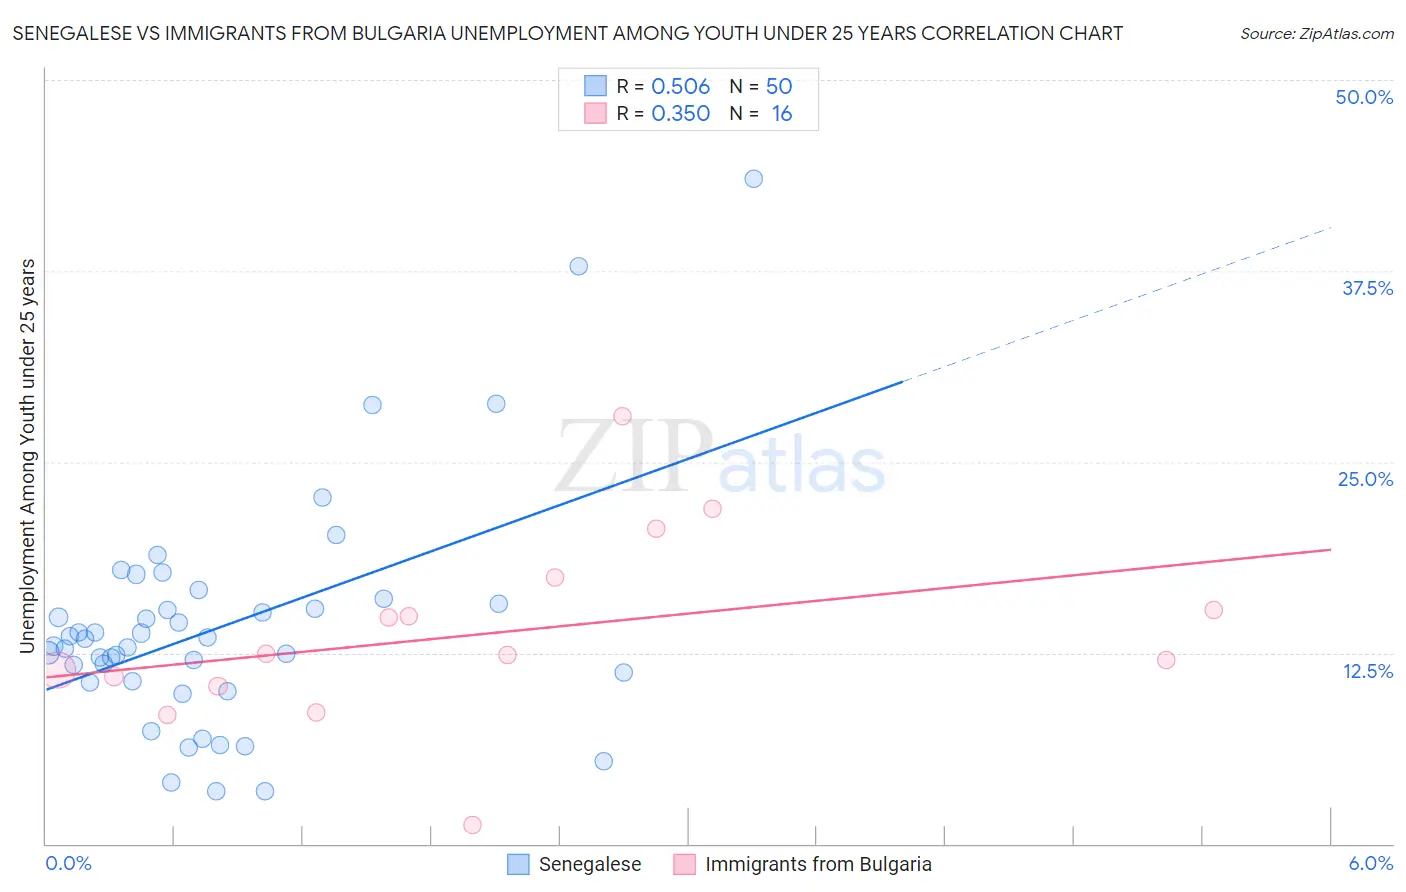 Senegalese vs Immigrants from Bulgaria Unemployment Among Youth under 25 years